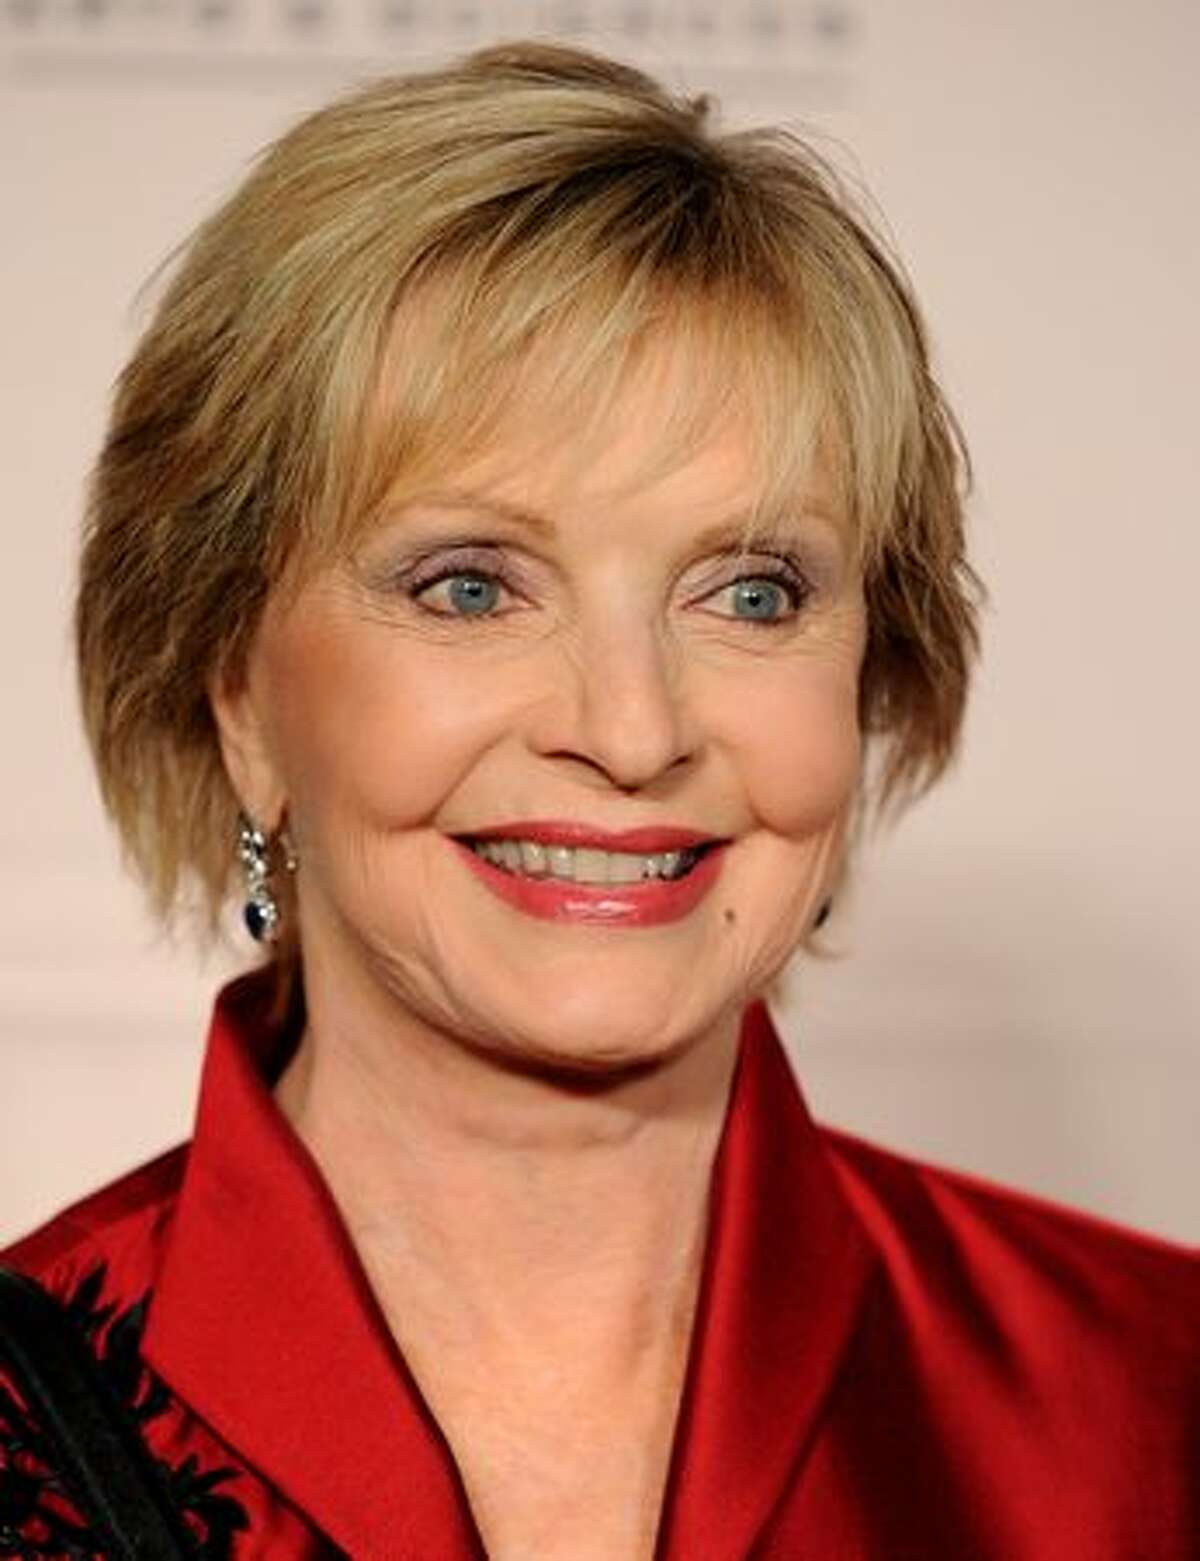 Actress Florence Henderson arrives at the Academy of Television Arts & Sciences' 3rd Annual Academy Honors at the Beverly Hills Hotel on May 5, 2010 in Beverly Hills, California.